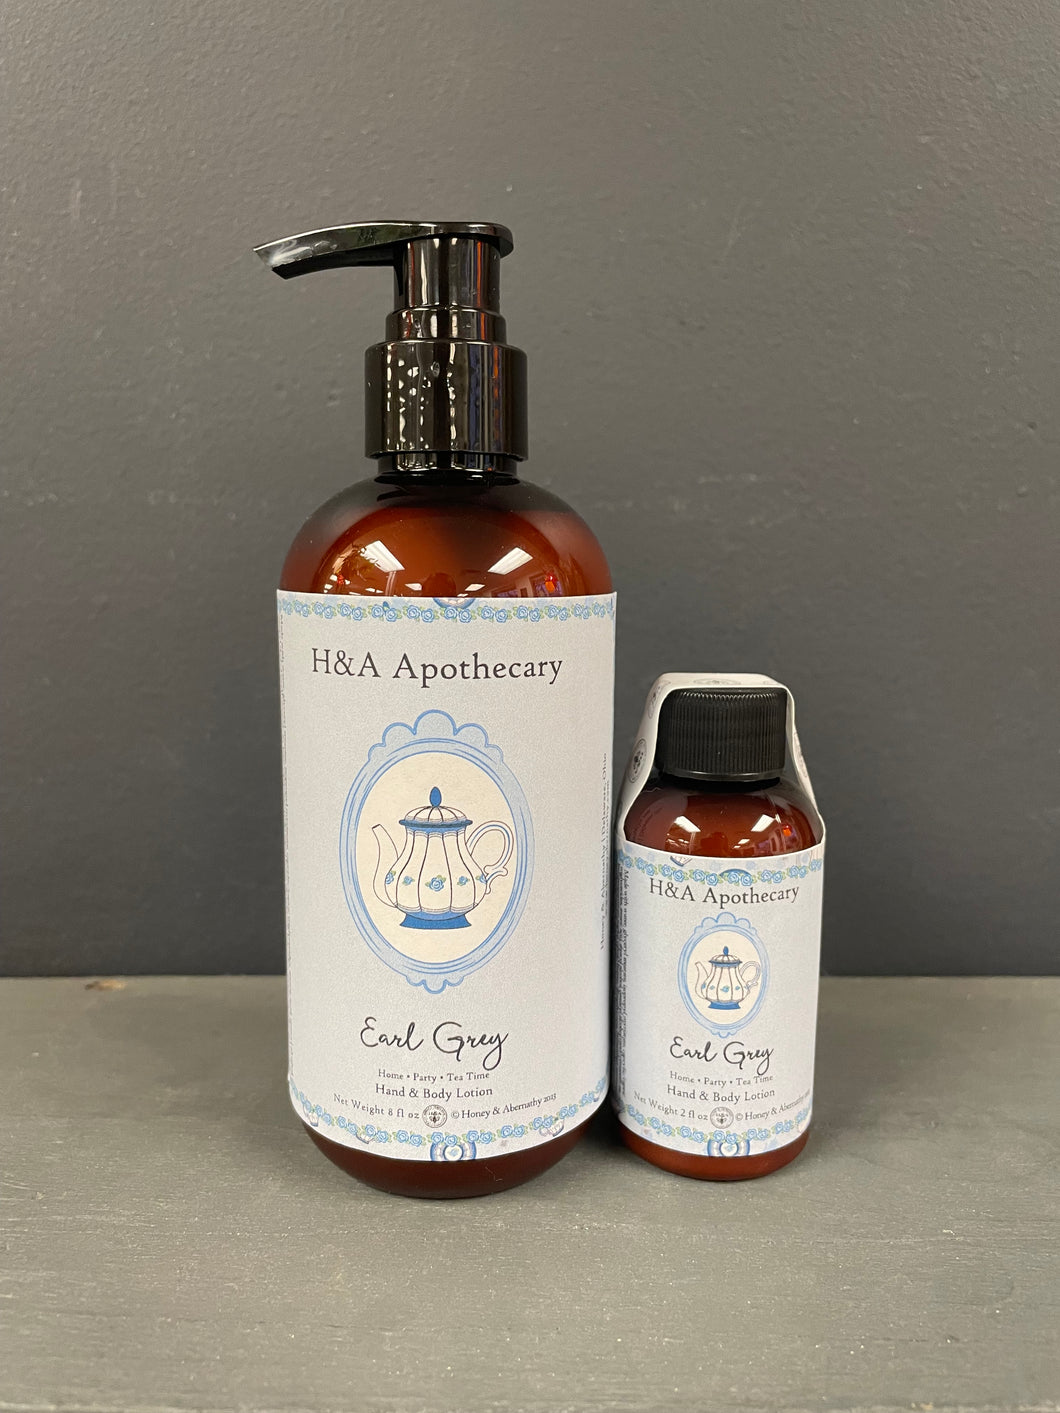 H&A Apothecary Earl Grey Hand & Body Lotion